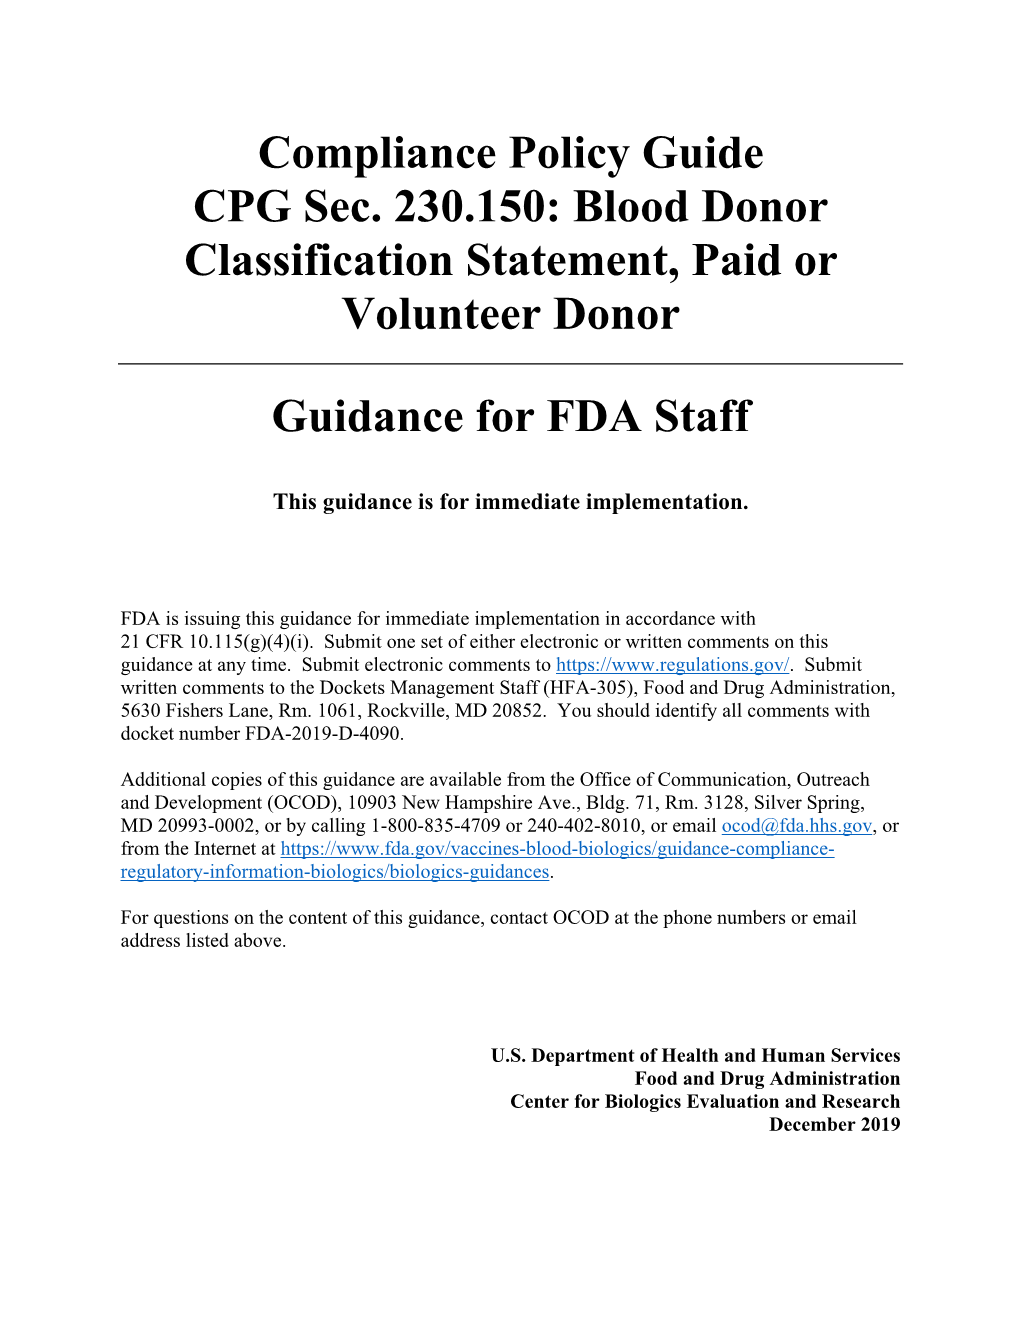 CPG Sec. 230.150: Blood Donor Classification Statement, Paid Or Volunteer Donor